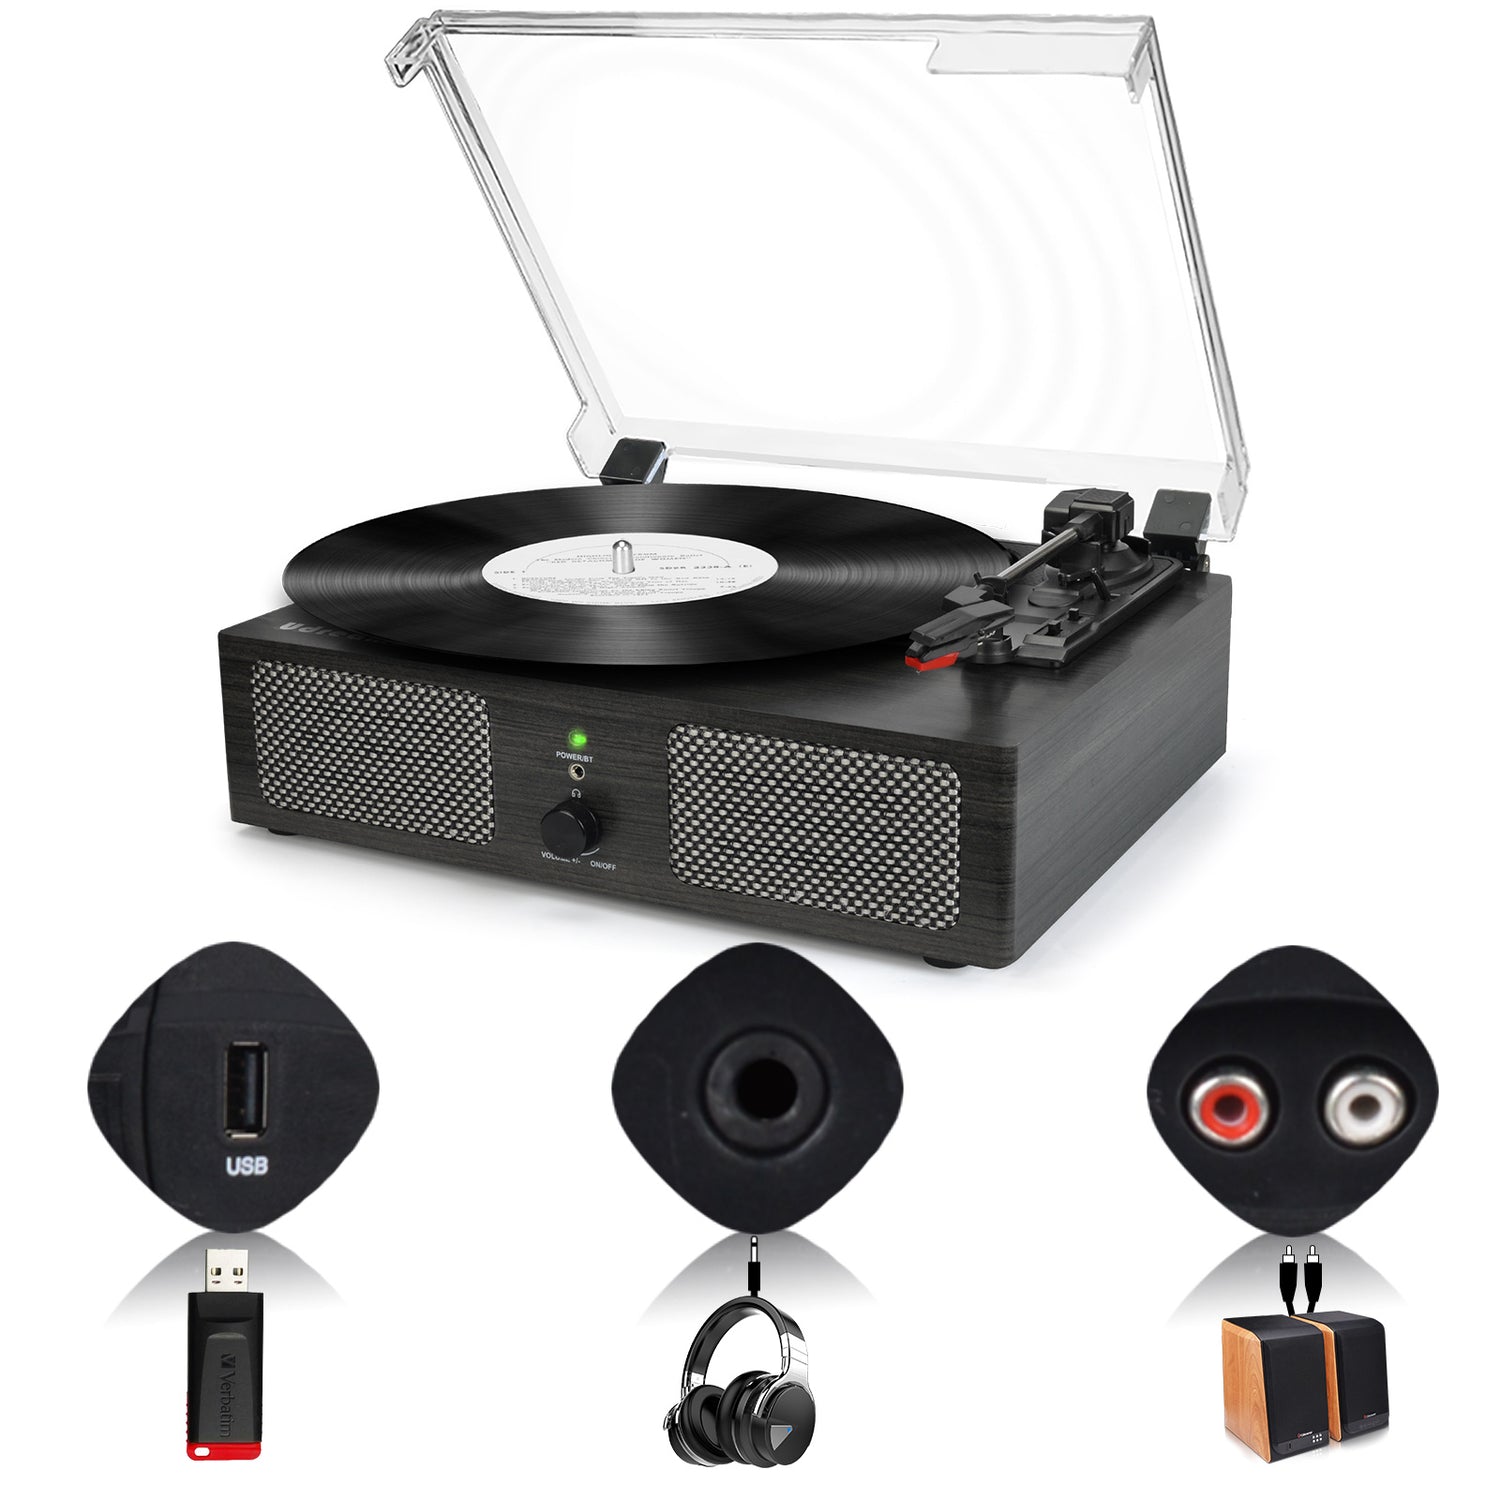 Udreamer record player turntable Sigbeez